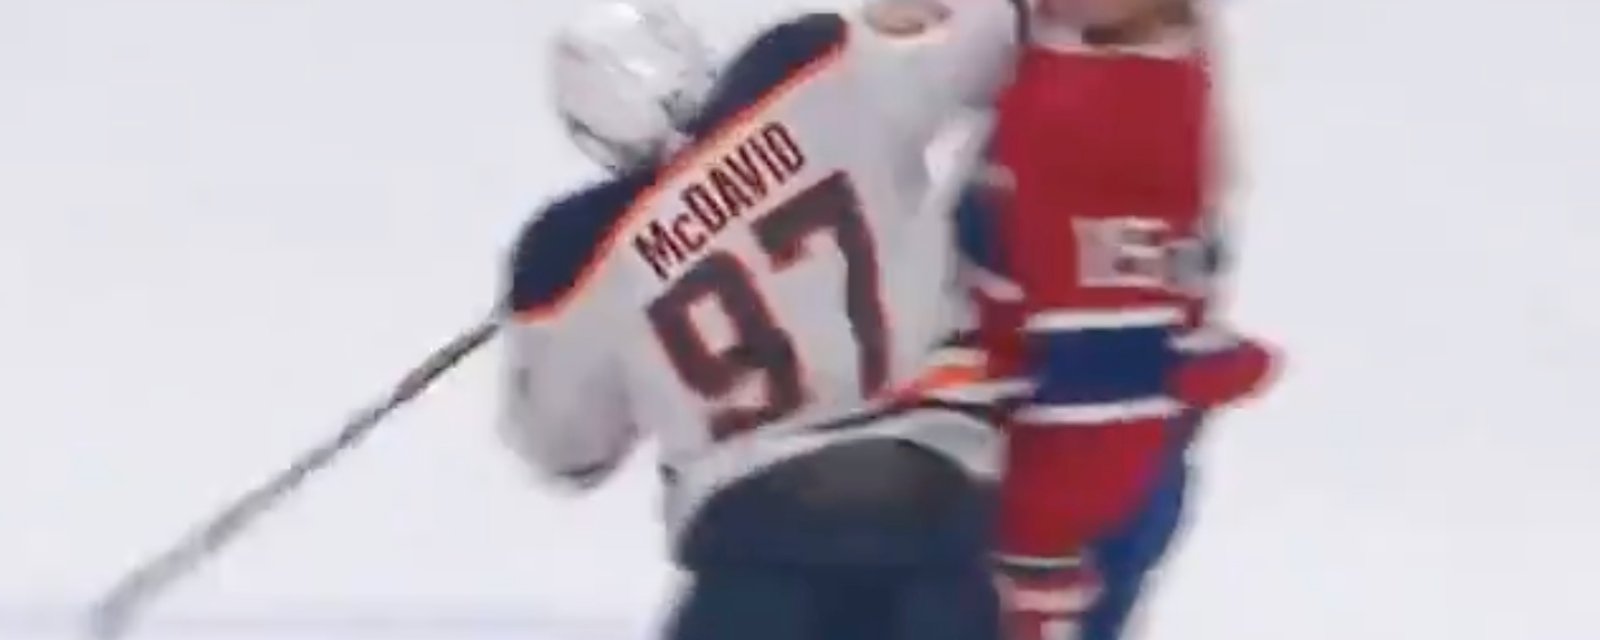 McDavid snaps and looks to commit suspendable play! 